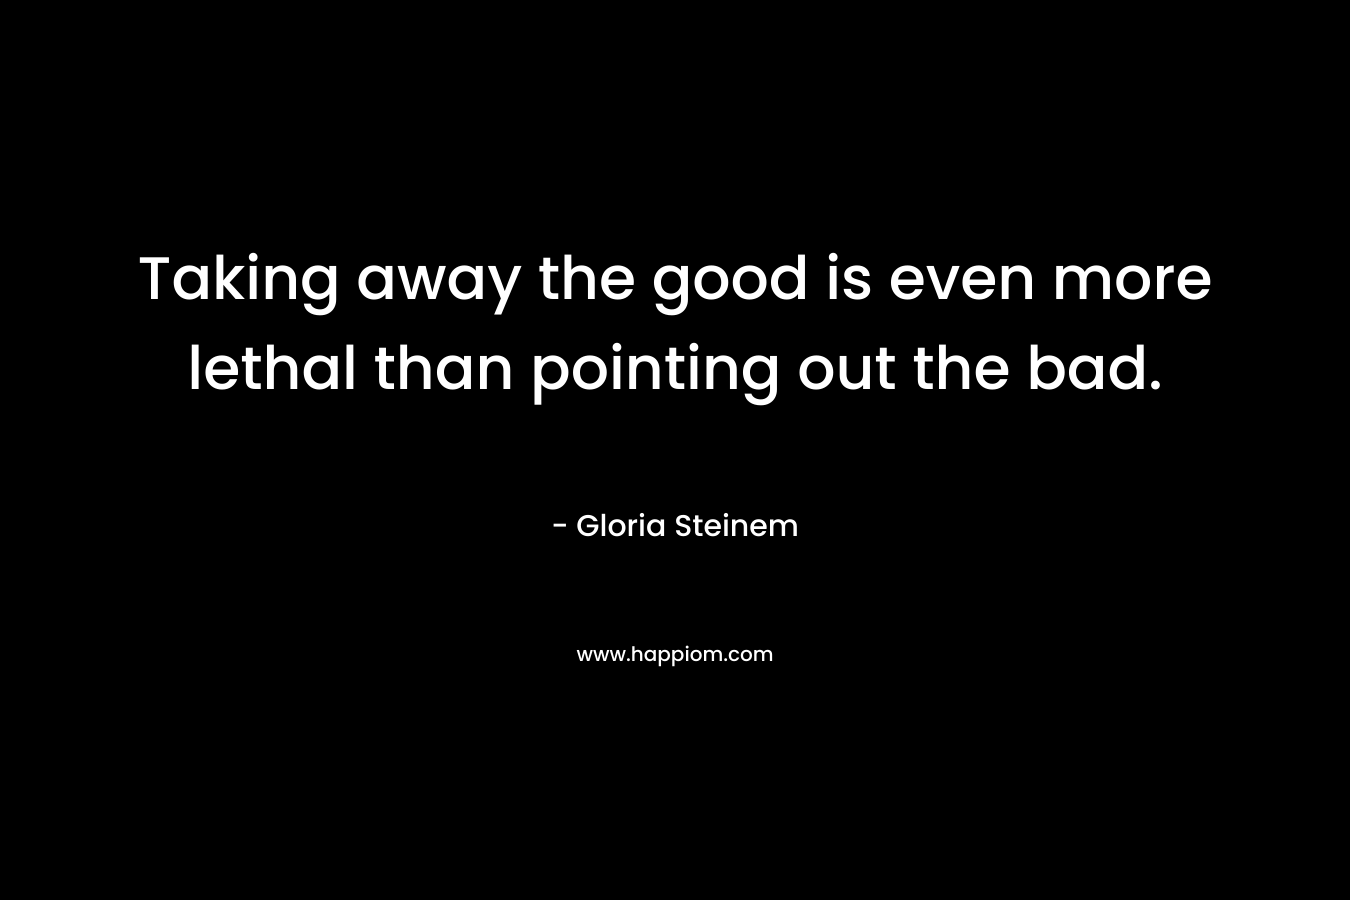 Taking away the good is even more lethal than pointing out the bad. – Gloria Steinem